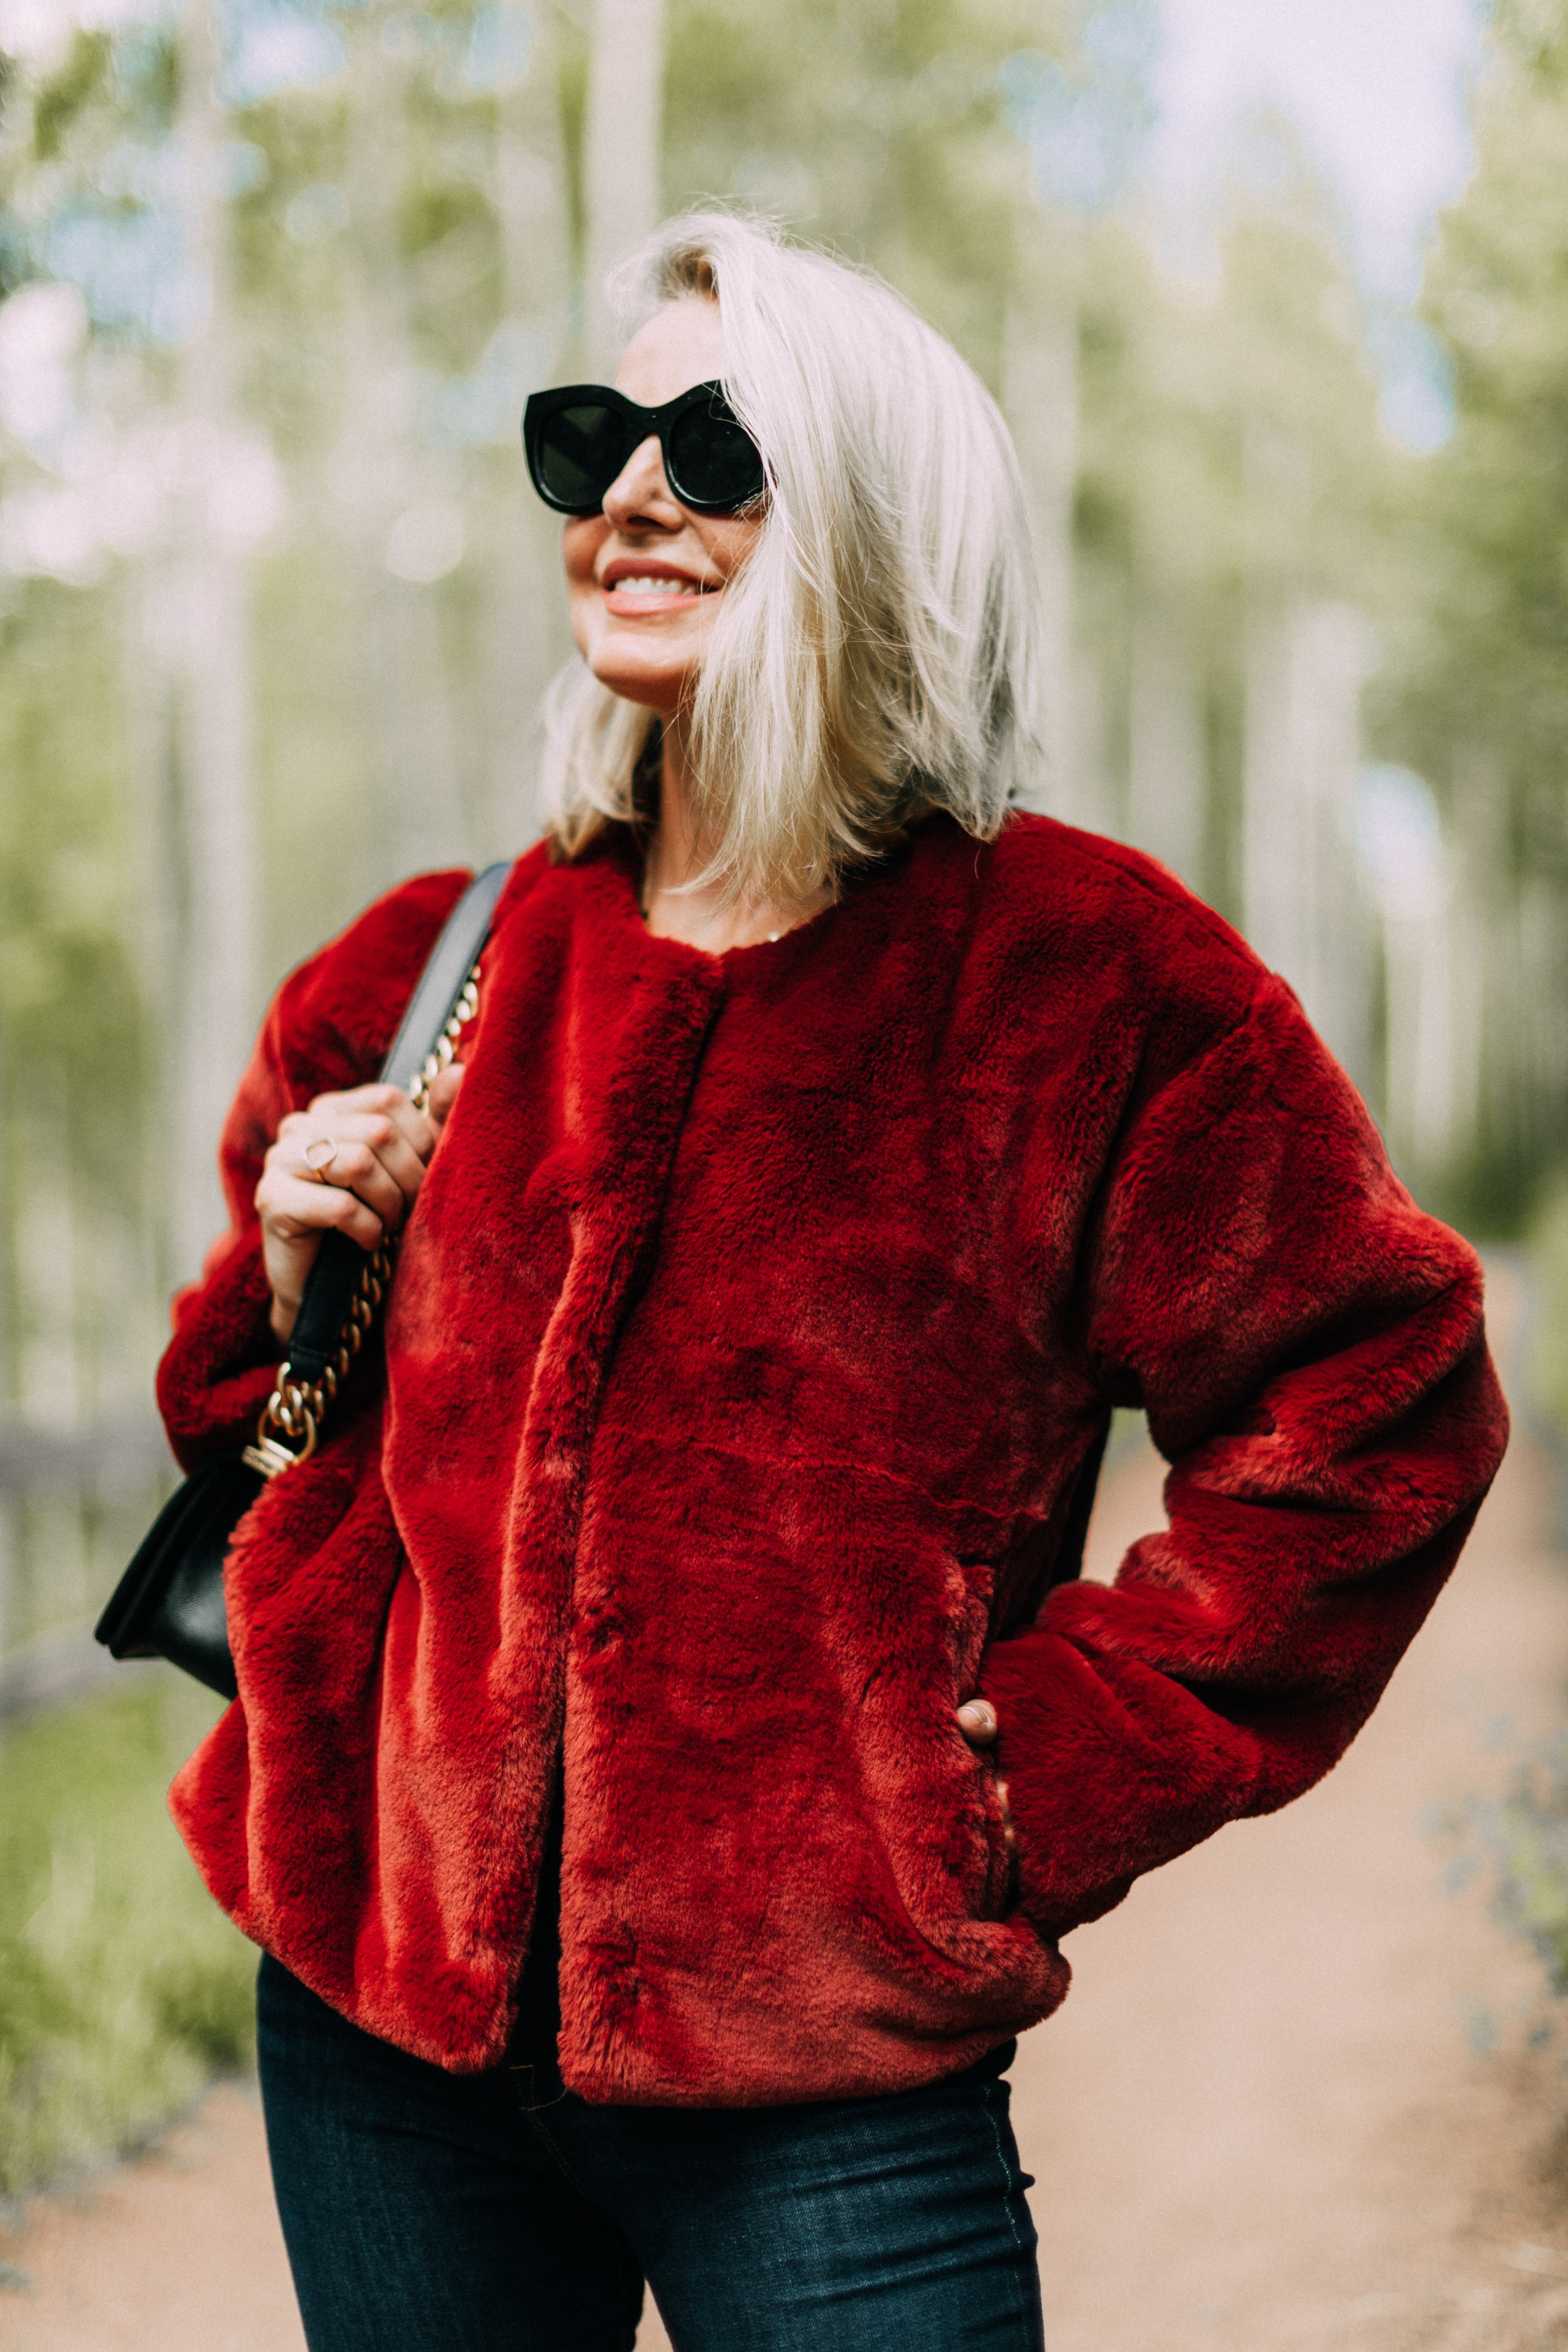 nordstrom anniversary sale 2019 best jackets including this faux fur jacket by Sanctuary on fashion blogger Erin Busbee in Telluride Colorado